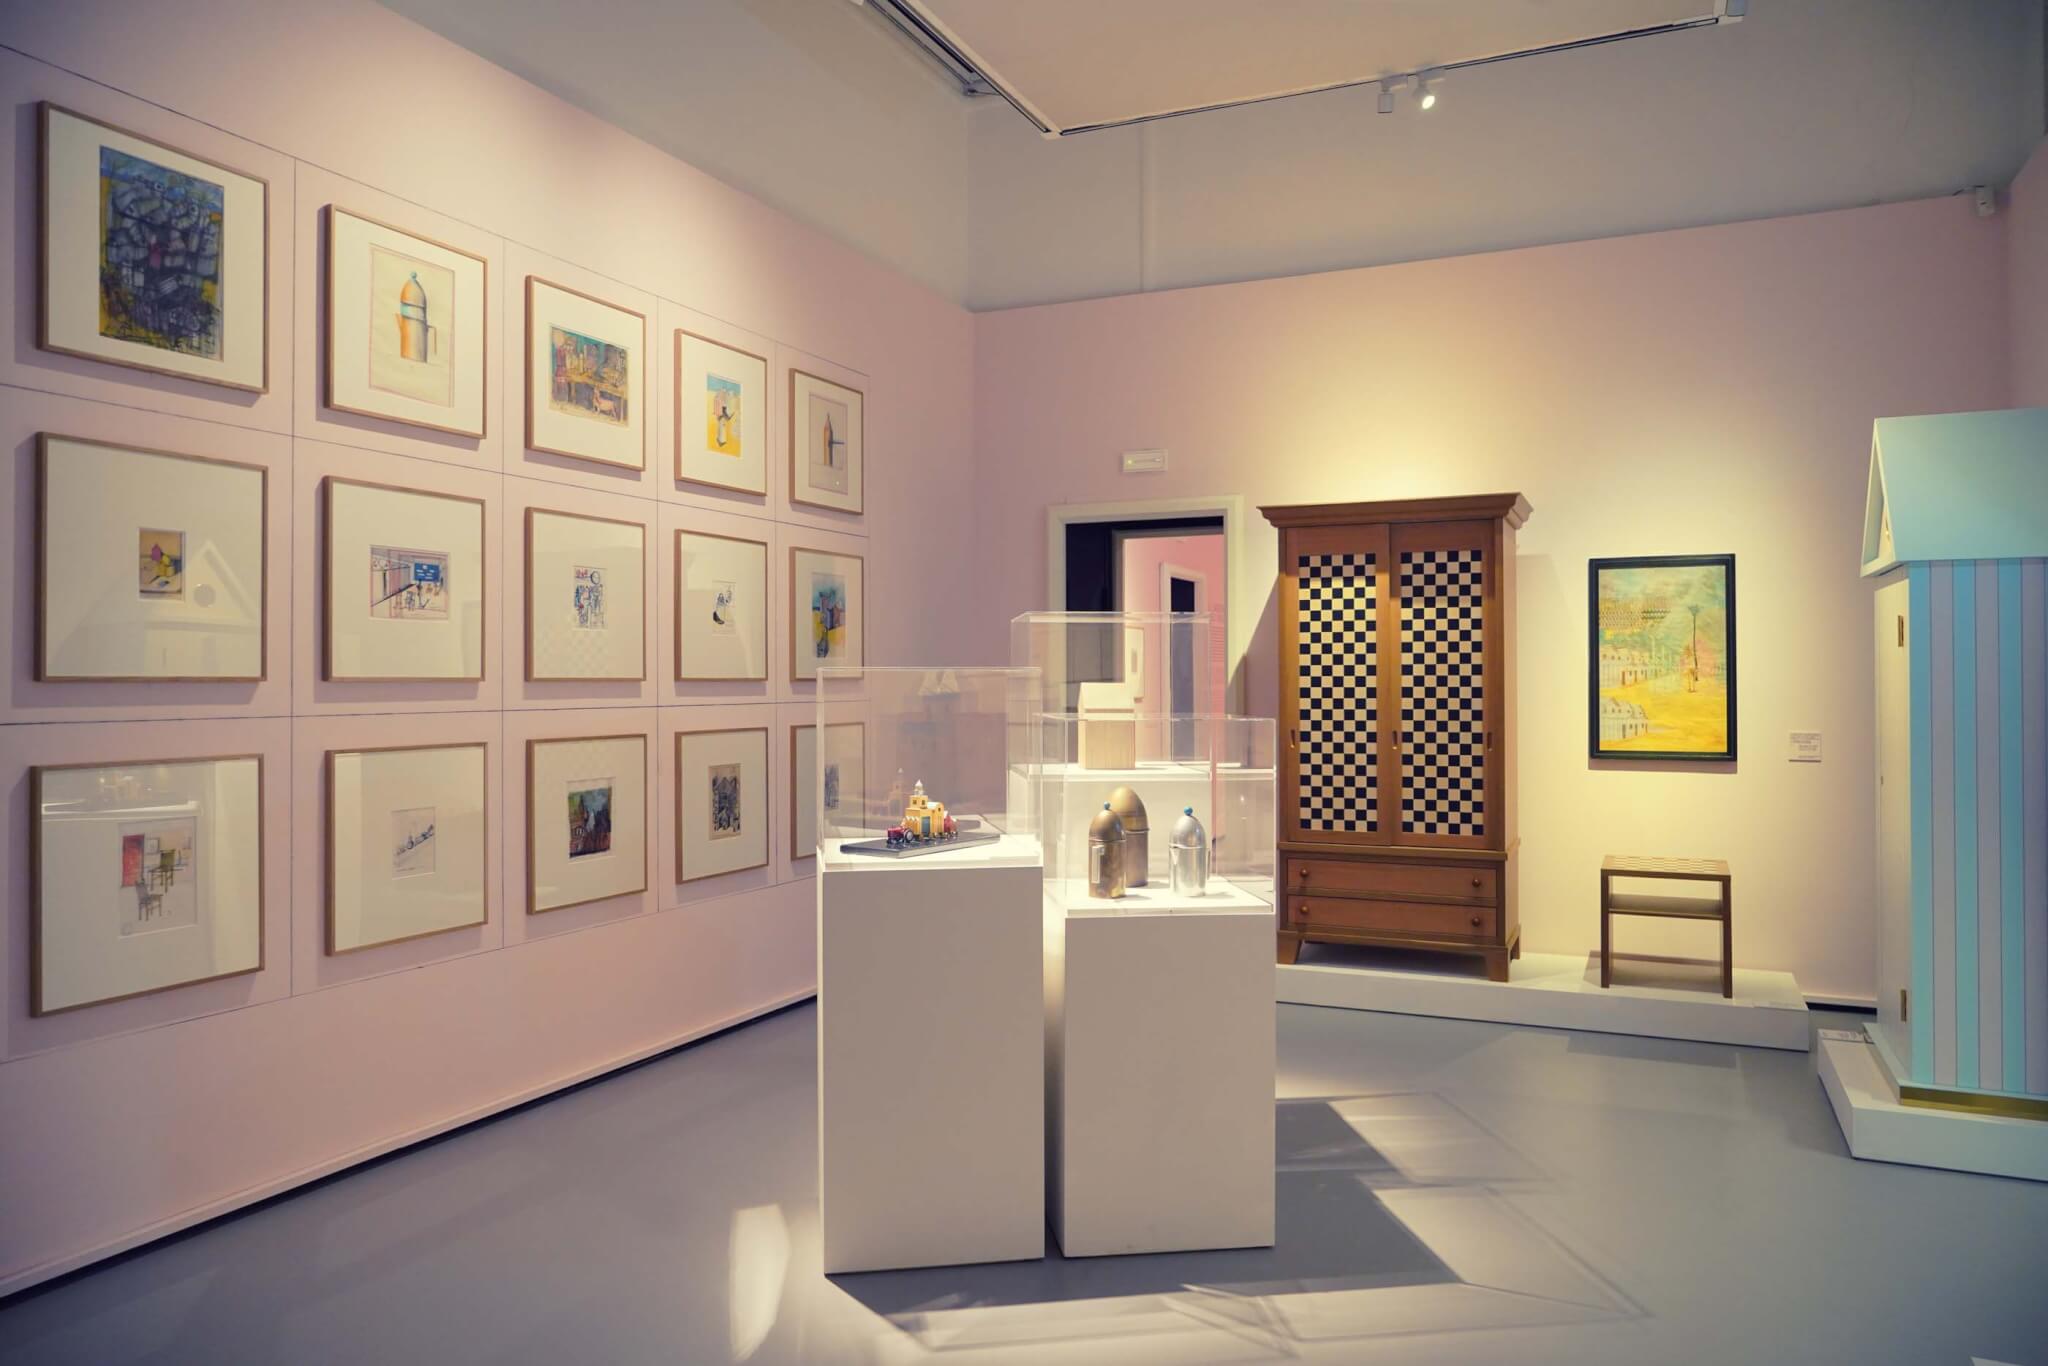 exhibition room with pink walls and sketches and objects on display